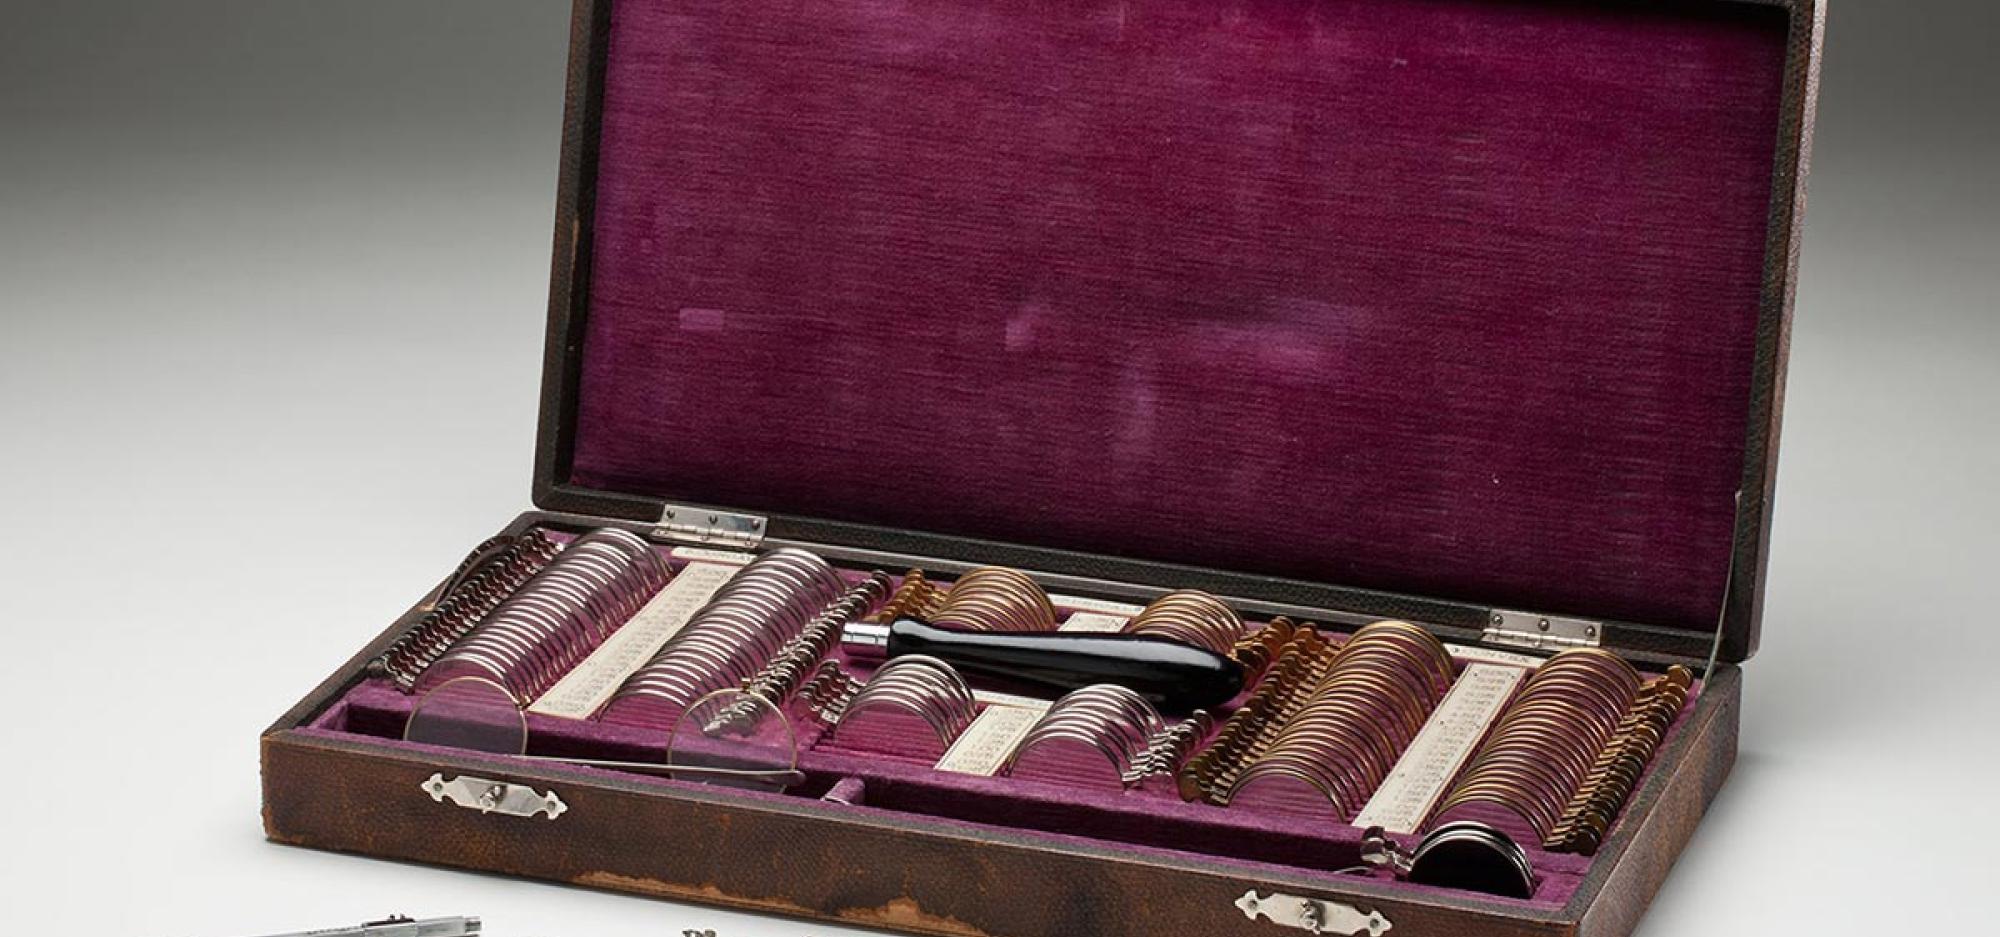 a wodden case with velvet linig. box contains slots filled with eyeglasses lenses and other instuments